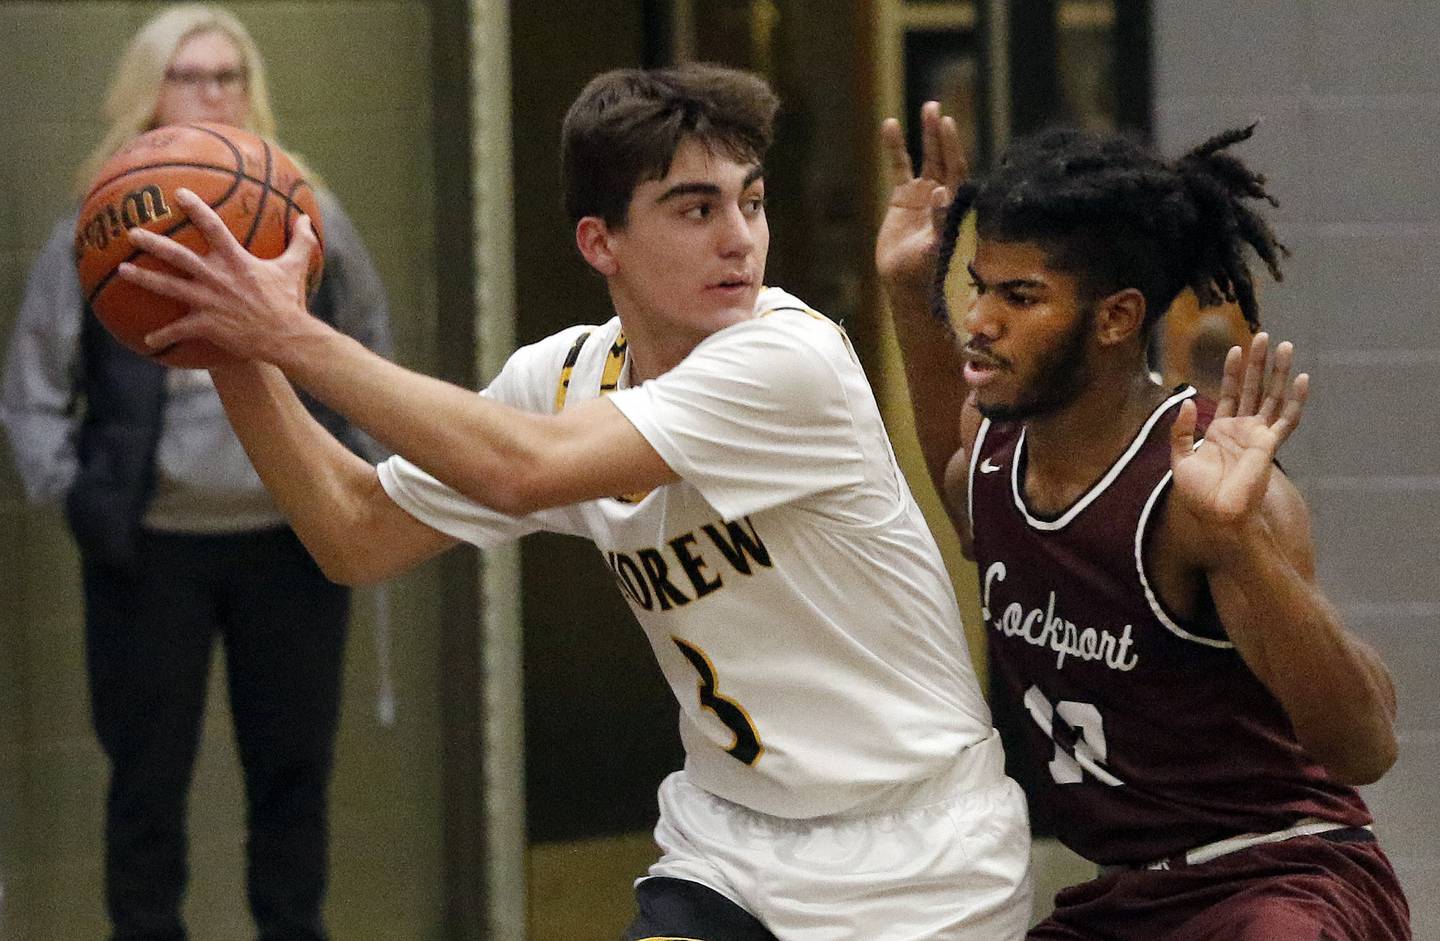 Lockport's Jalen Falcon, right, guards Andrew's Athan Berchos during a SouthWest Suburban Conference crossover on Friday, Dec. 9, 2022.